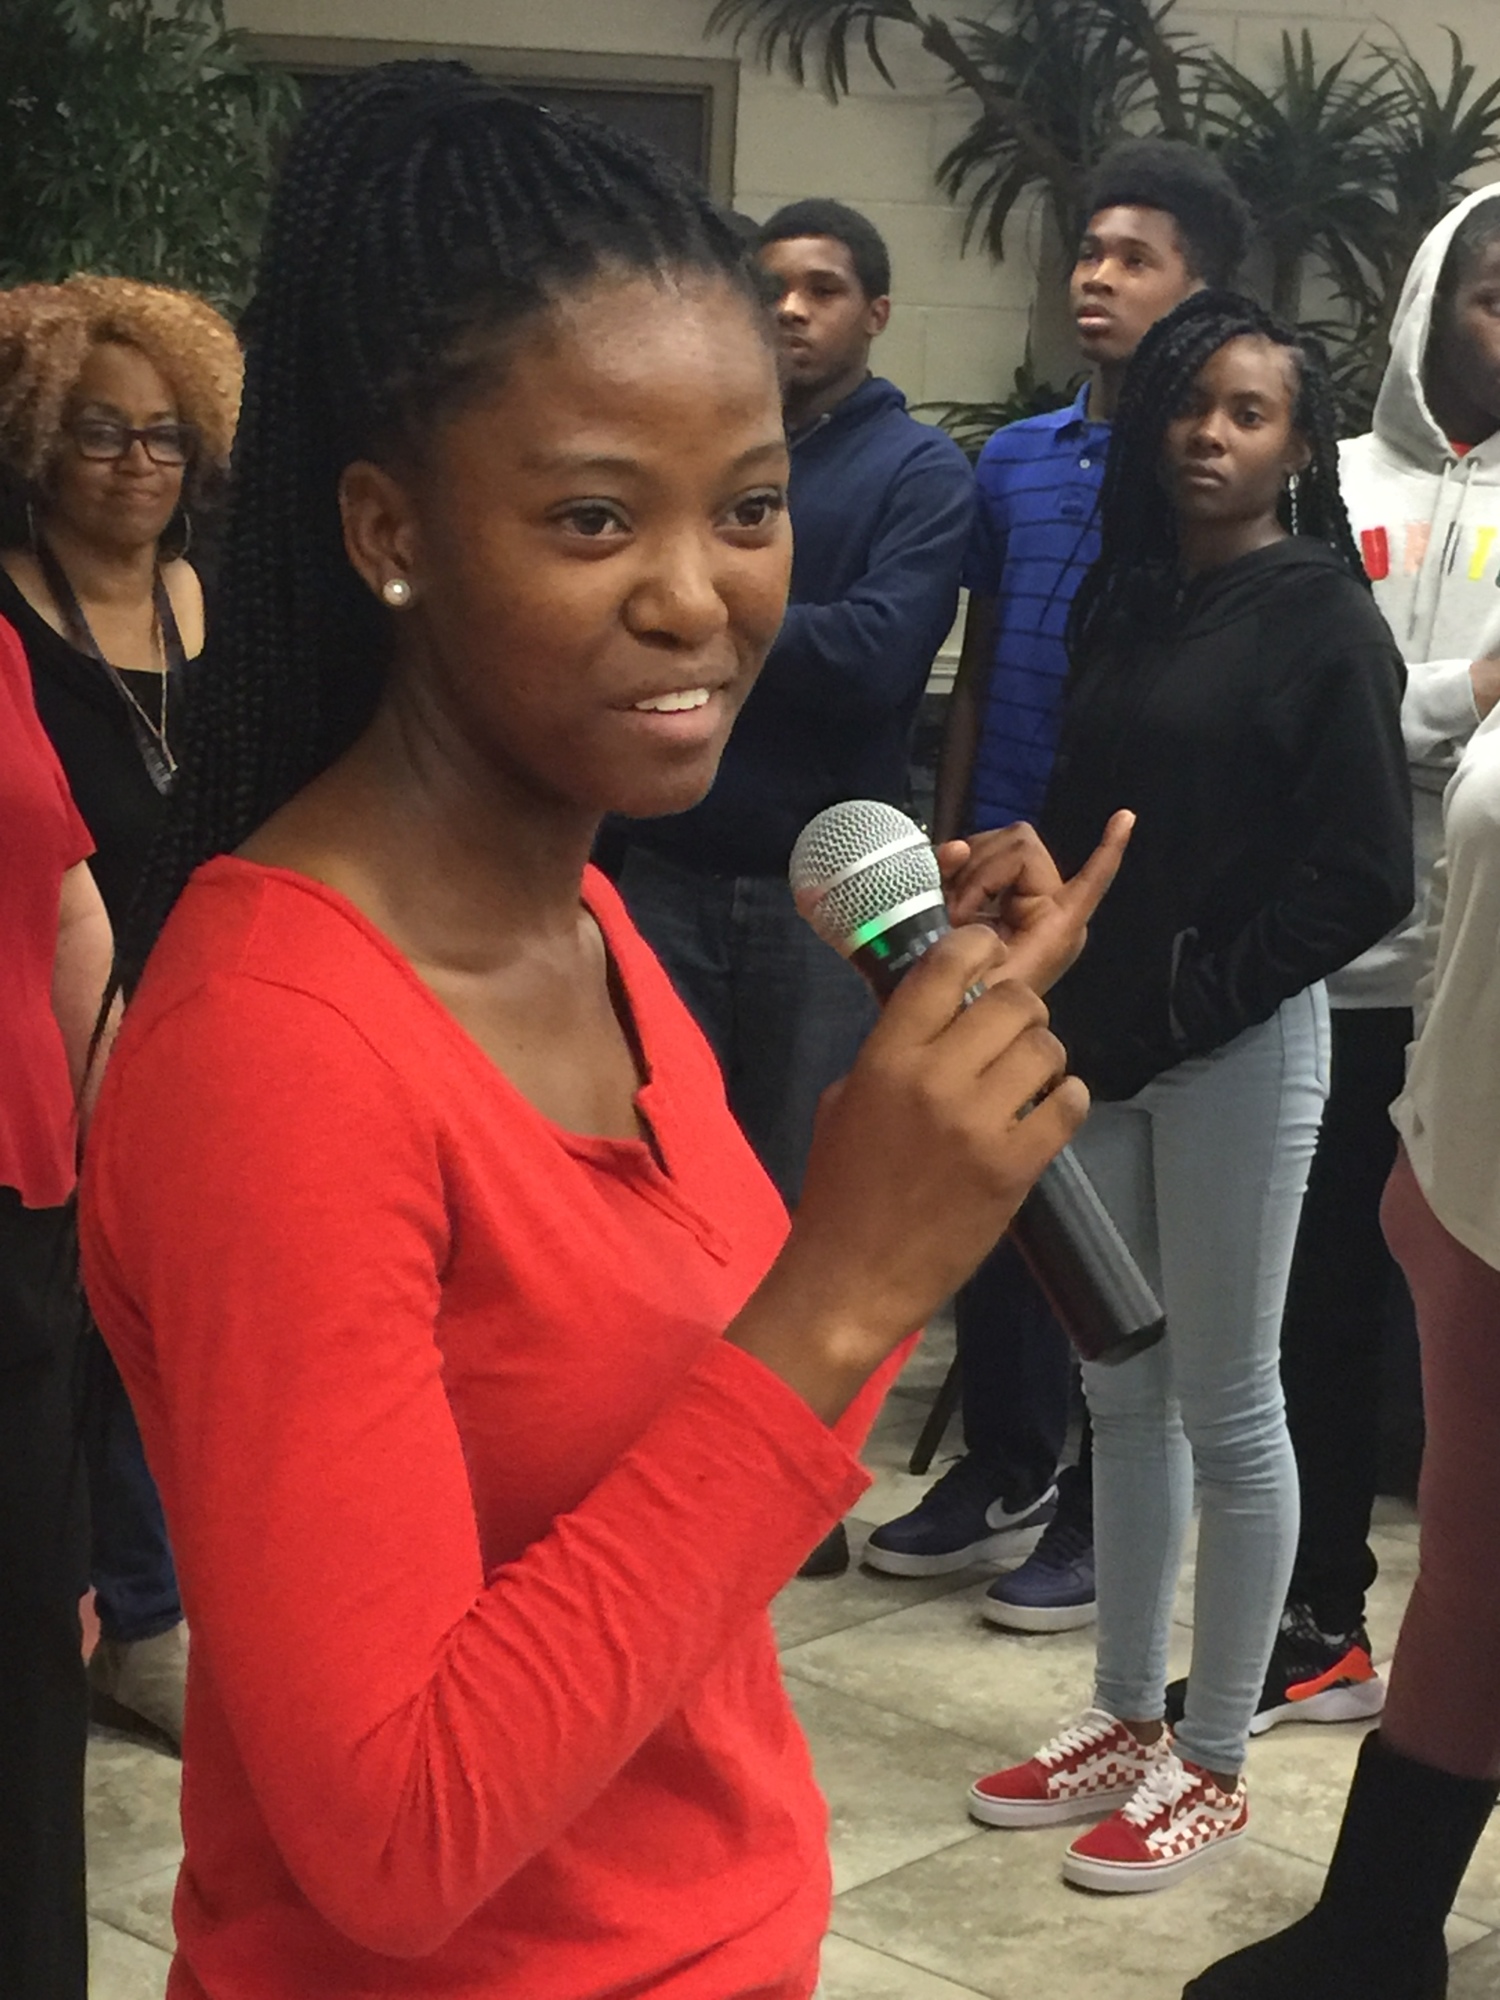 Phatsimo Ruele shared her faith testimony about her journey to America from Africa to go to college and play varsity tennis on full scholarship at the Toys for Joy Outreach event. Photo courtesy of Carmen Caldwell